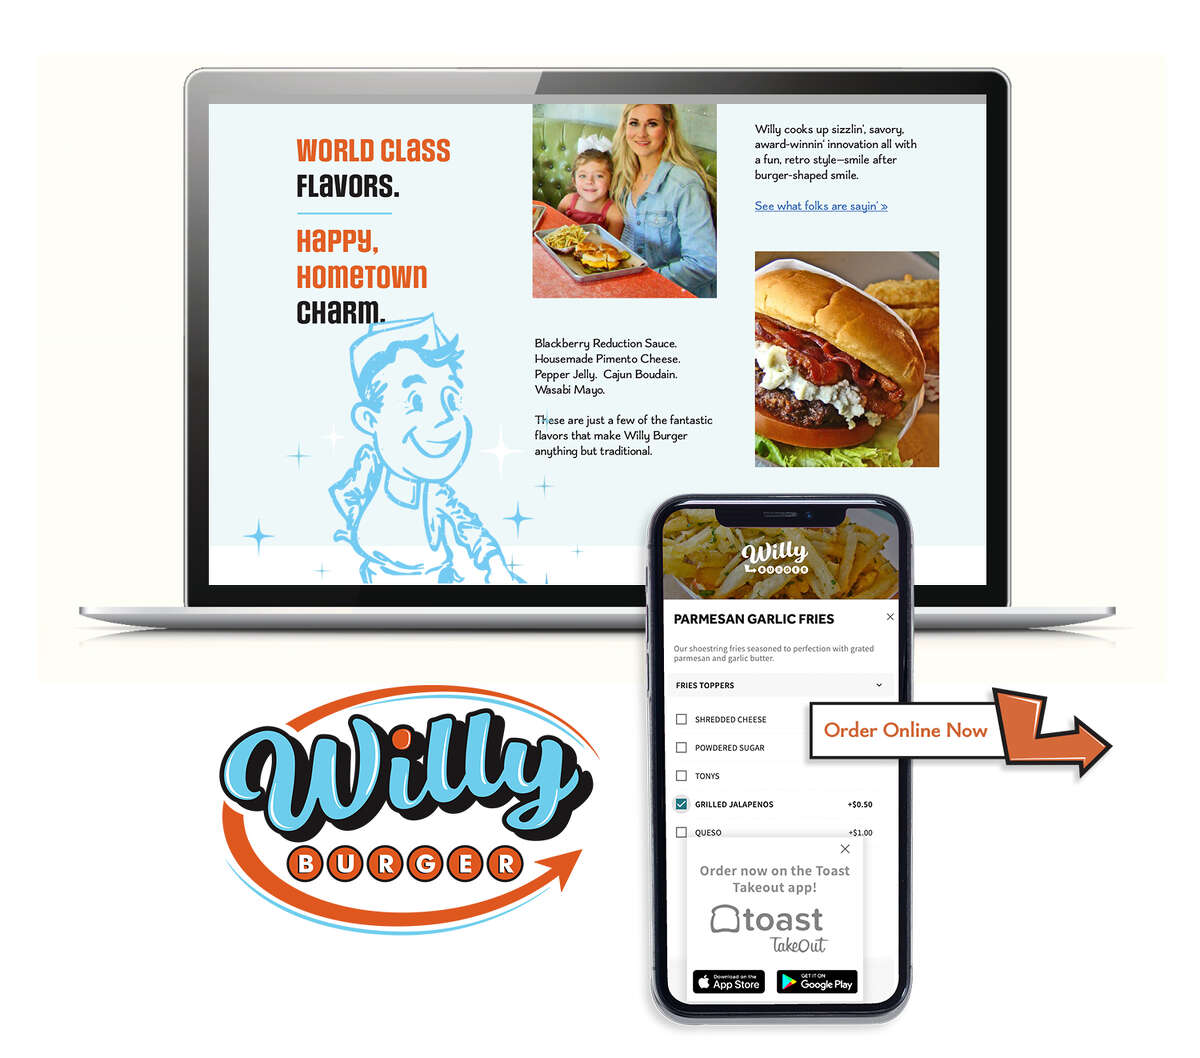 New Willy Burger website allows for willy accessible desktop or mobile use.